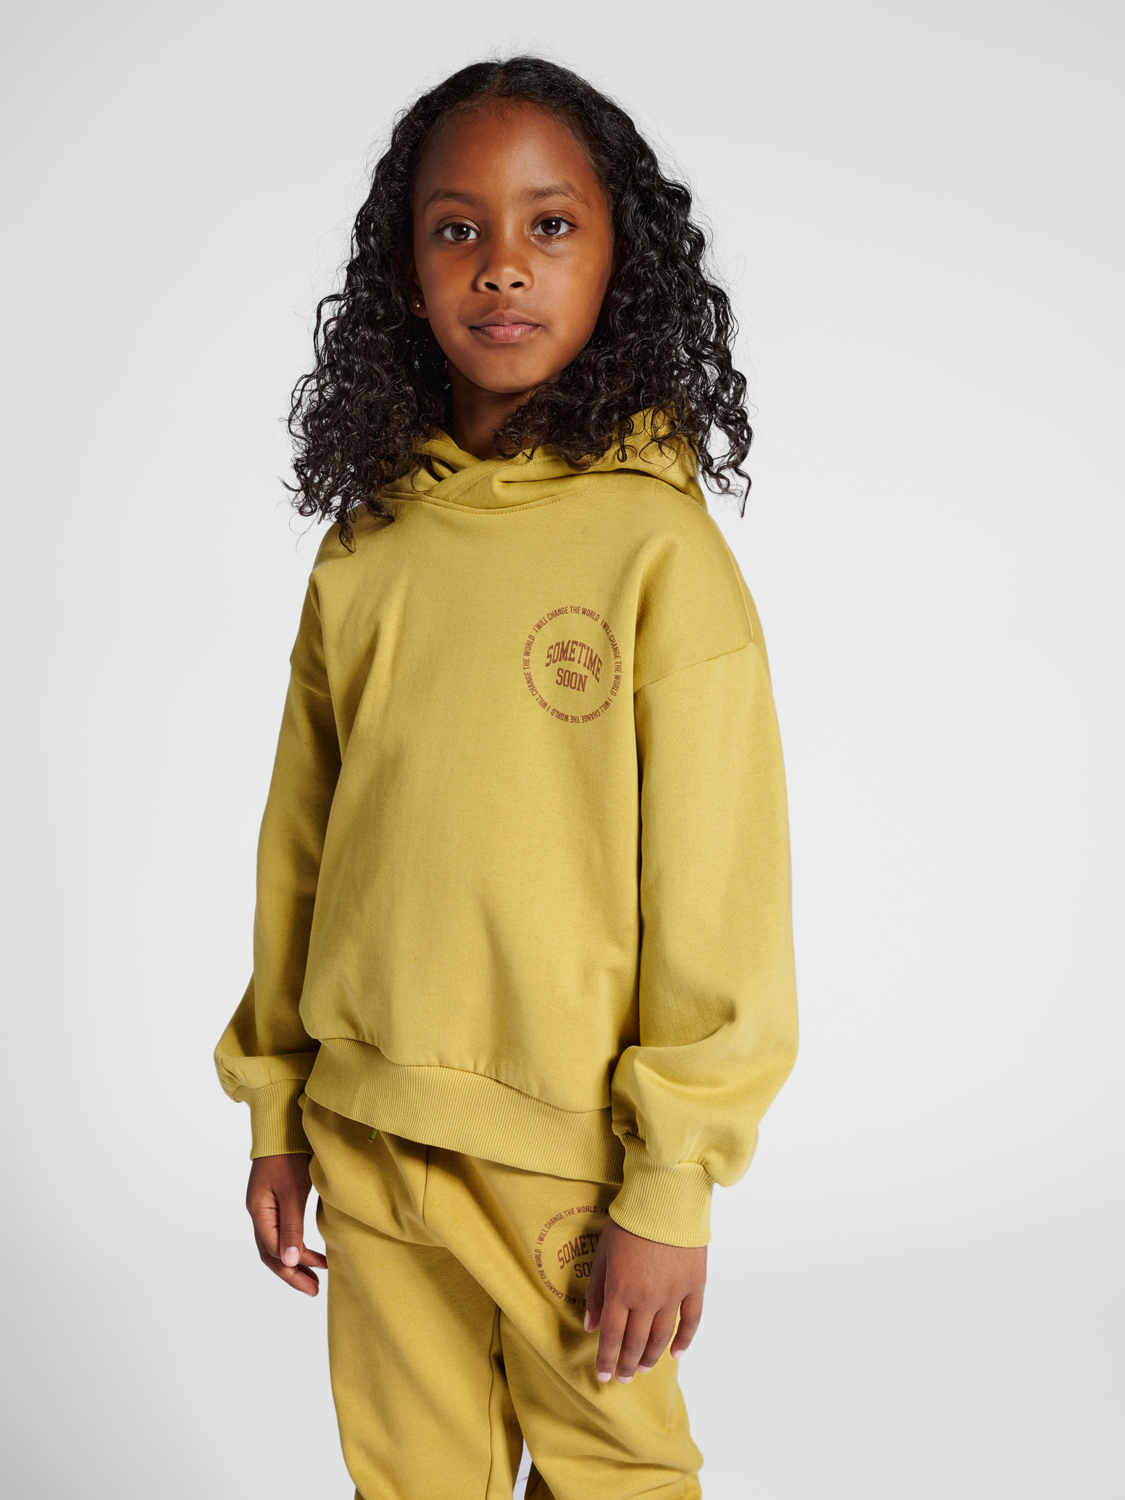 Canopy universel Hoody Etoile grise - Le coin des petits